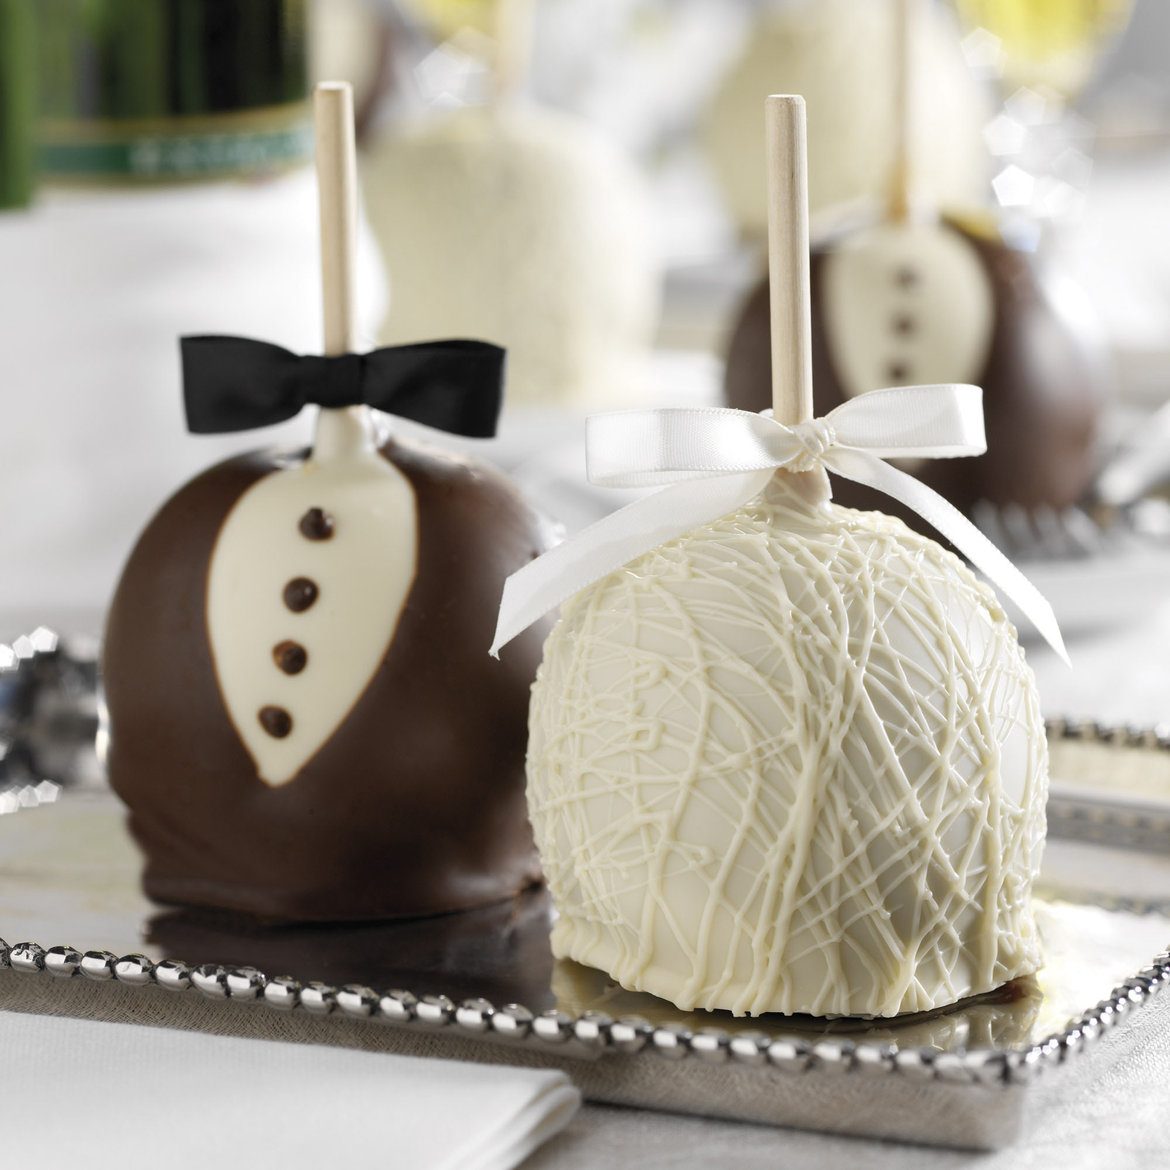 37 Edible Wedding Favors Guests Will Eat Up (Literally!)